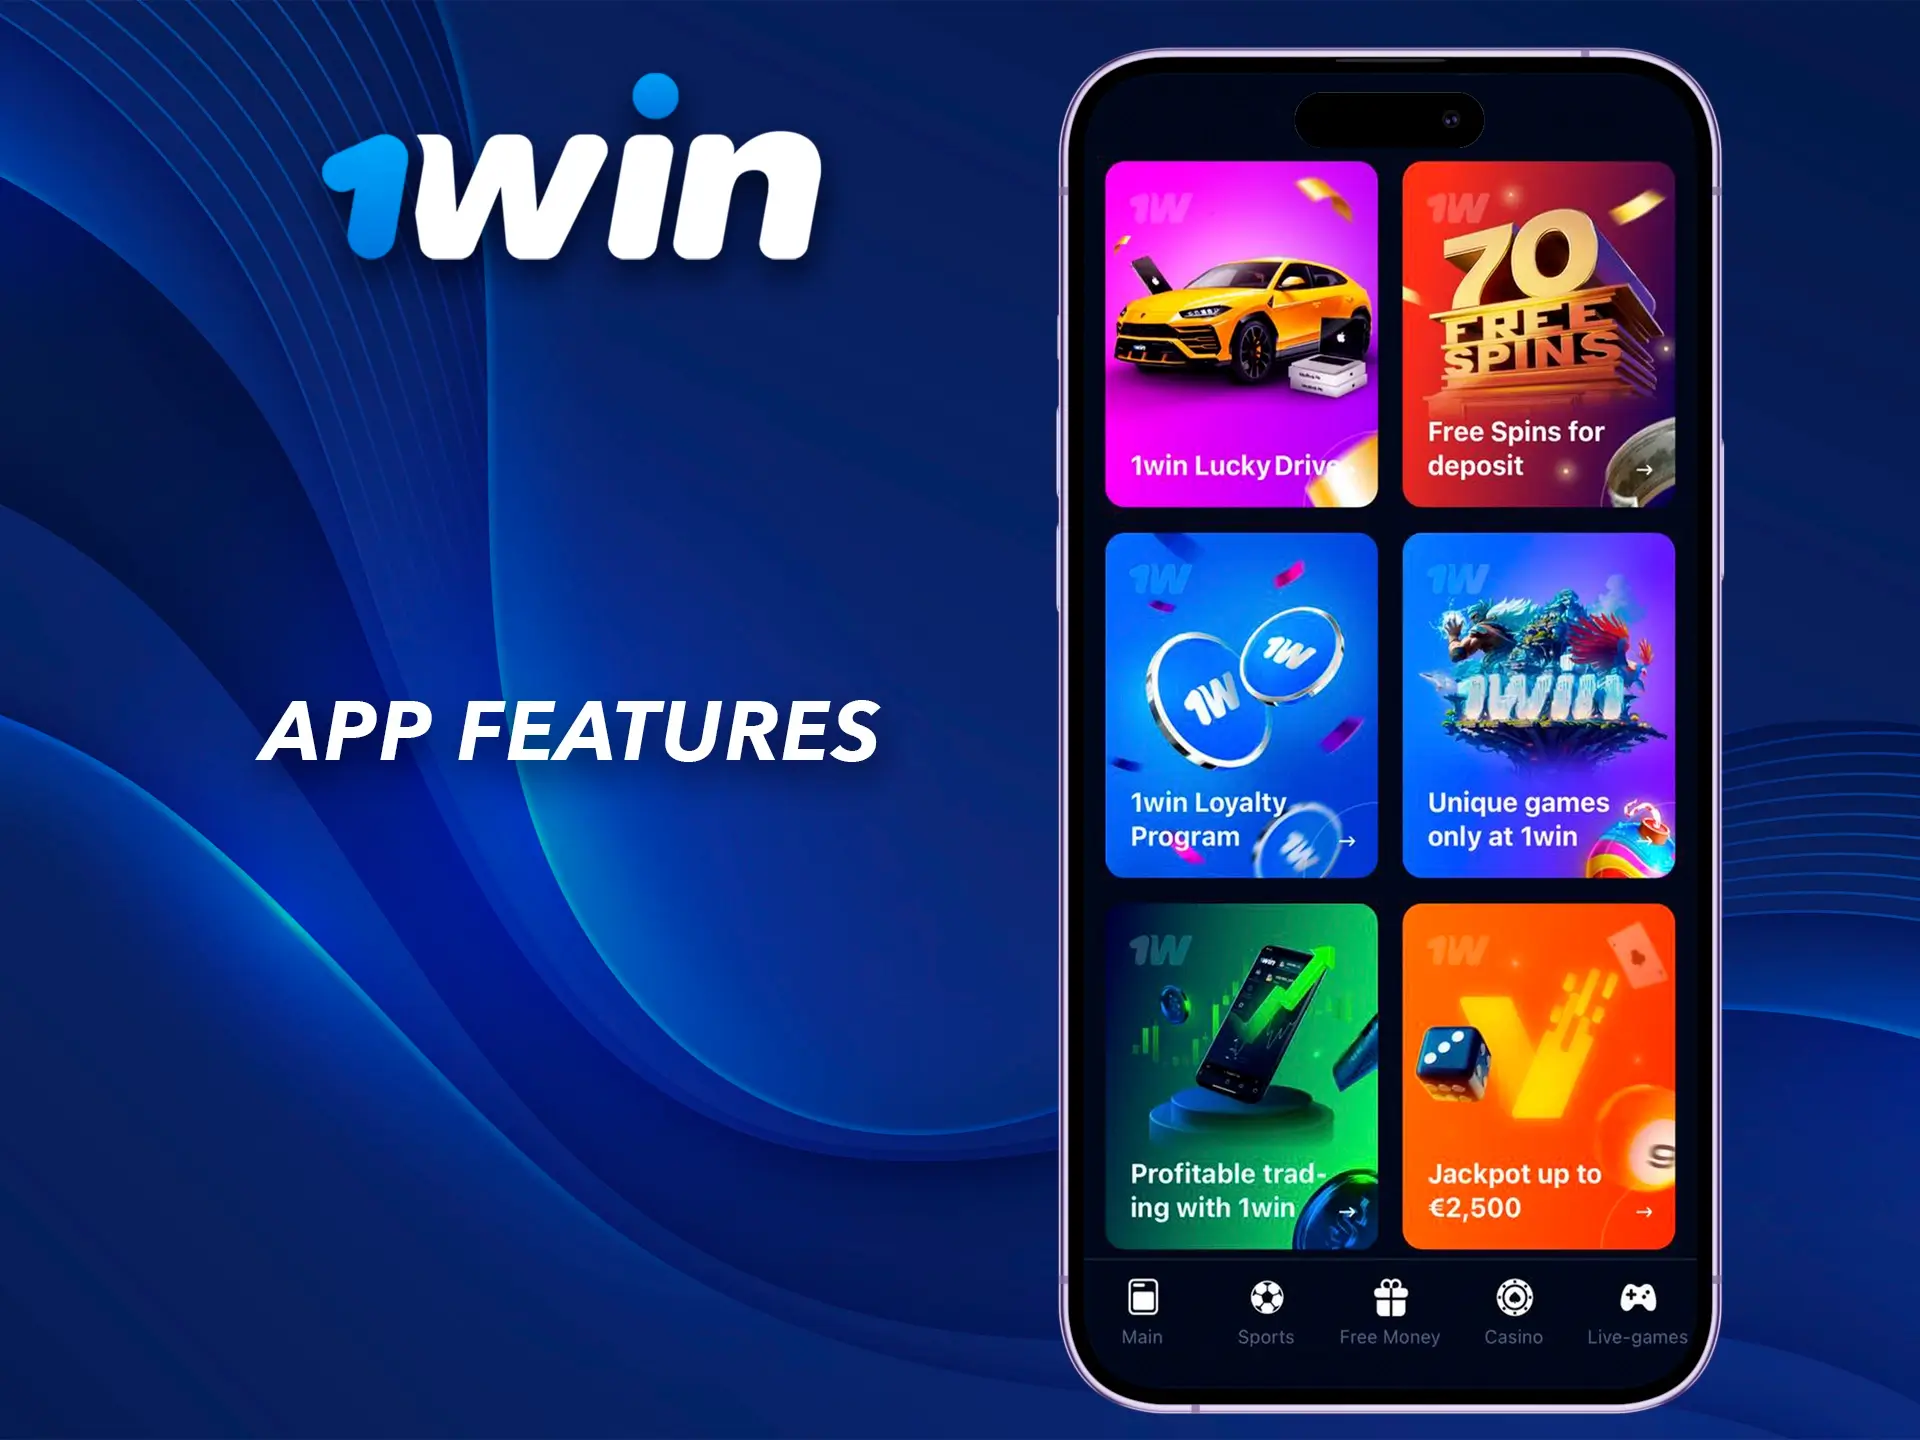 The bonuses and features of the 1Win app give any player a quick and confident start to their casino experience.